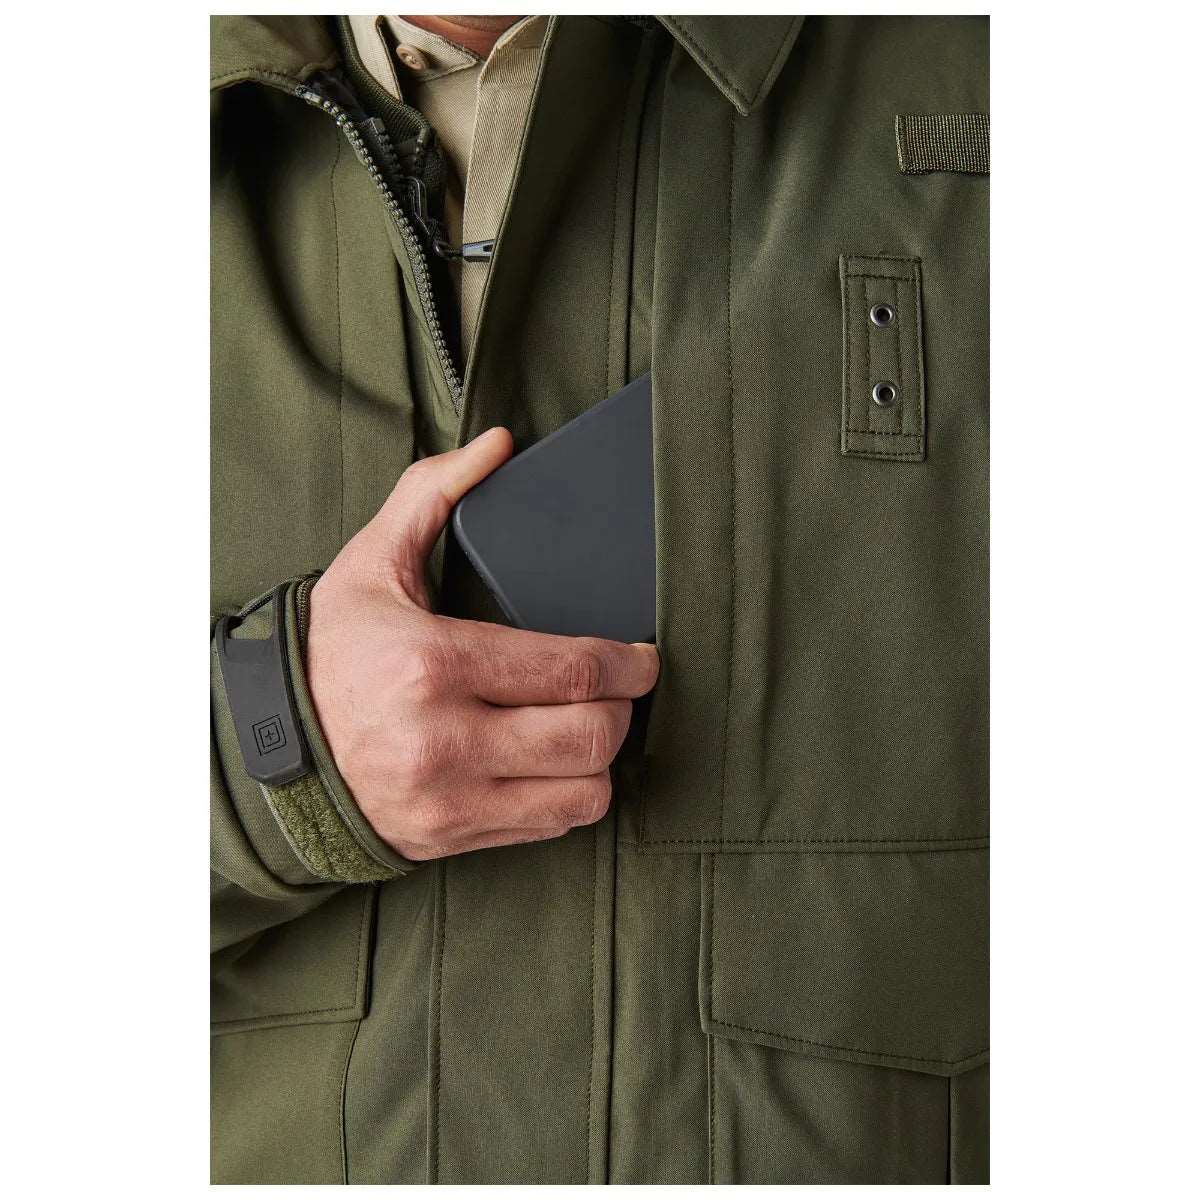 Outerwear - 5.11 Tactical 4-In-1 Patrol Jacket 2.0